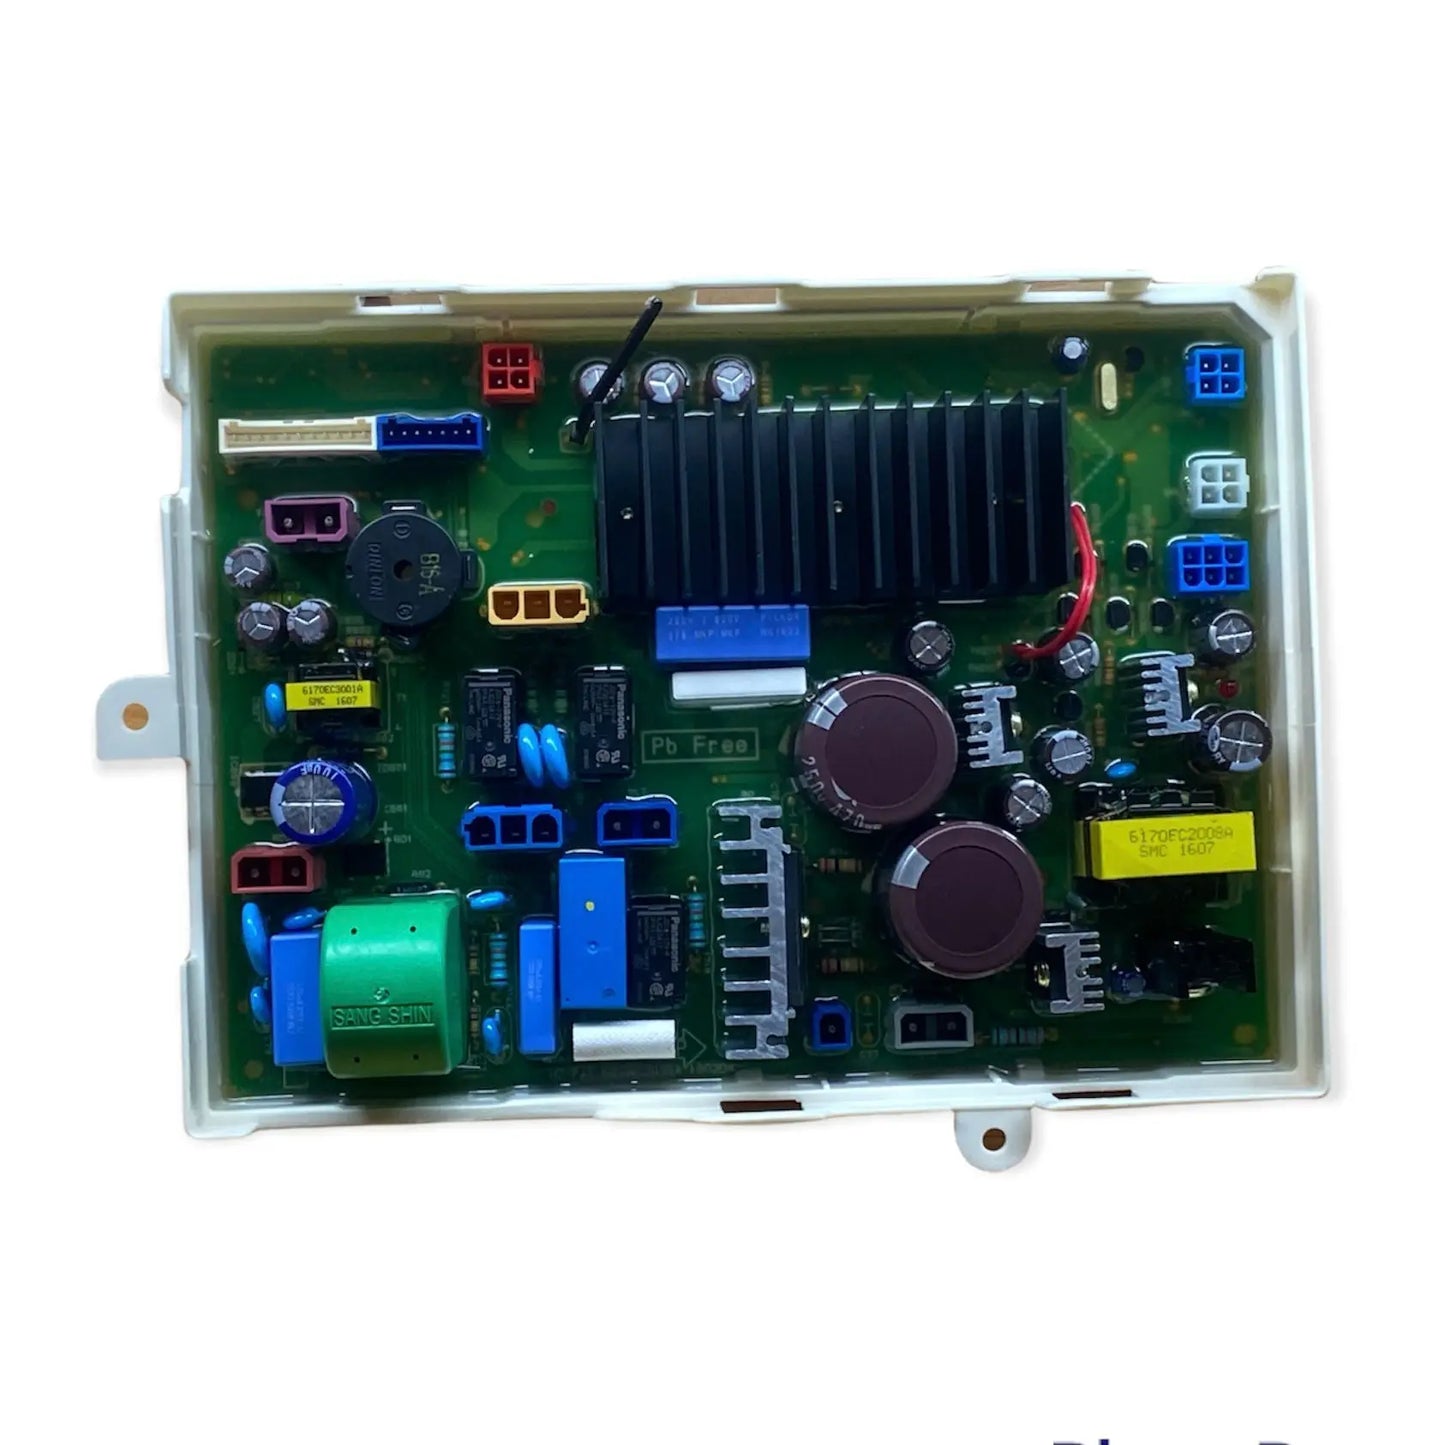 G.E Washer Power Control Board Assembly (PCB) -  WH12X10281 or WH12X10245,  REPLACES : WH12X10281X, WH12X10281, WH12X10281R, WH12X10281A, WH12X10281C, WG04F02313, 1168675, AP38833974, PS960658, EAP960658, PD0000150 INVERTEC